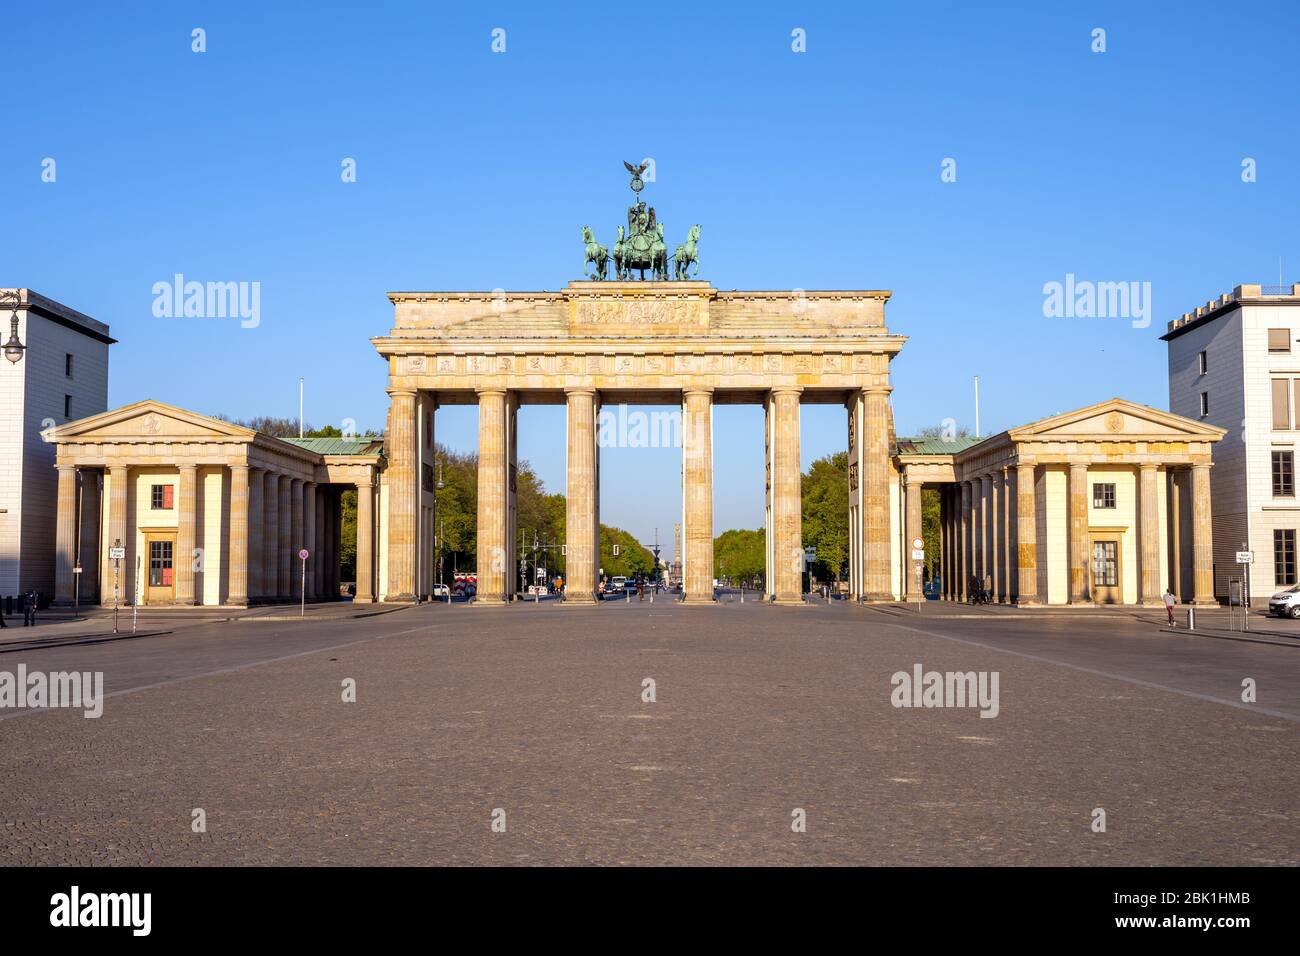 Panorama of the famous Brandenburger Tor in Berlin with no people Stock Photo